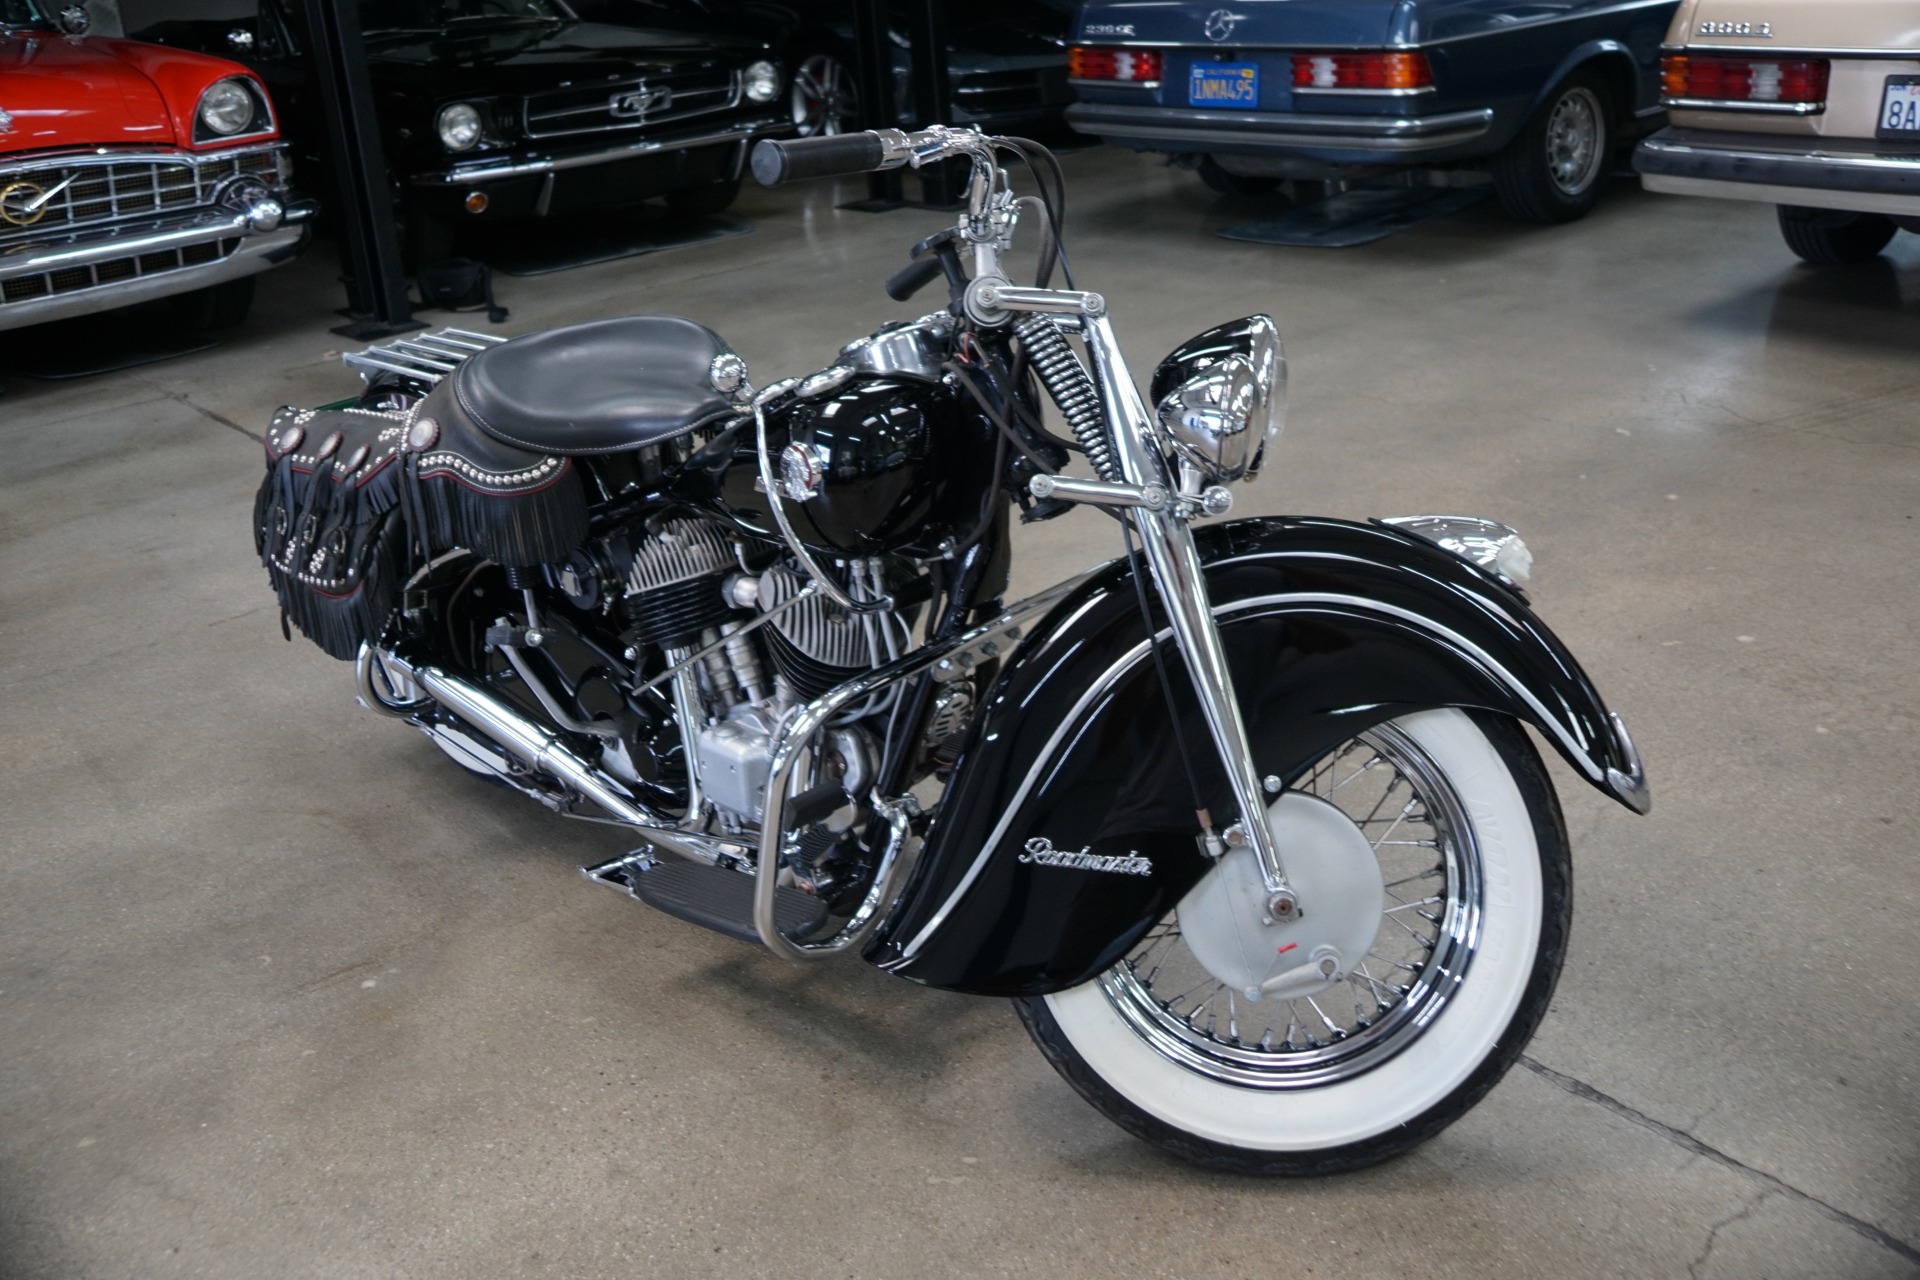 1947 Indian Chief Roadmaster 1200cc 74 c.i. Motorcycle Stock